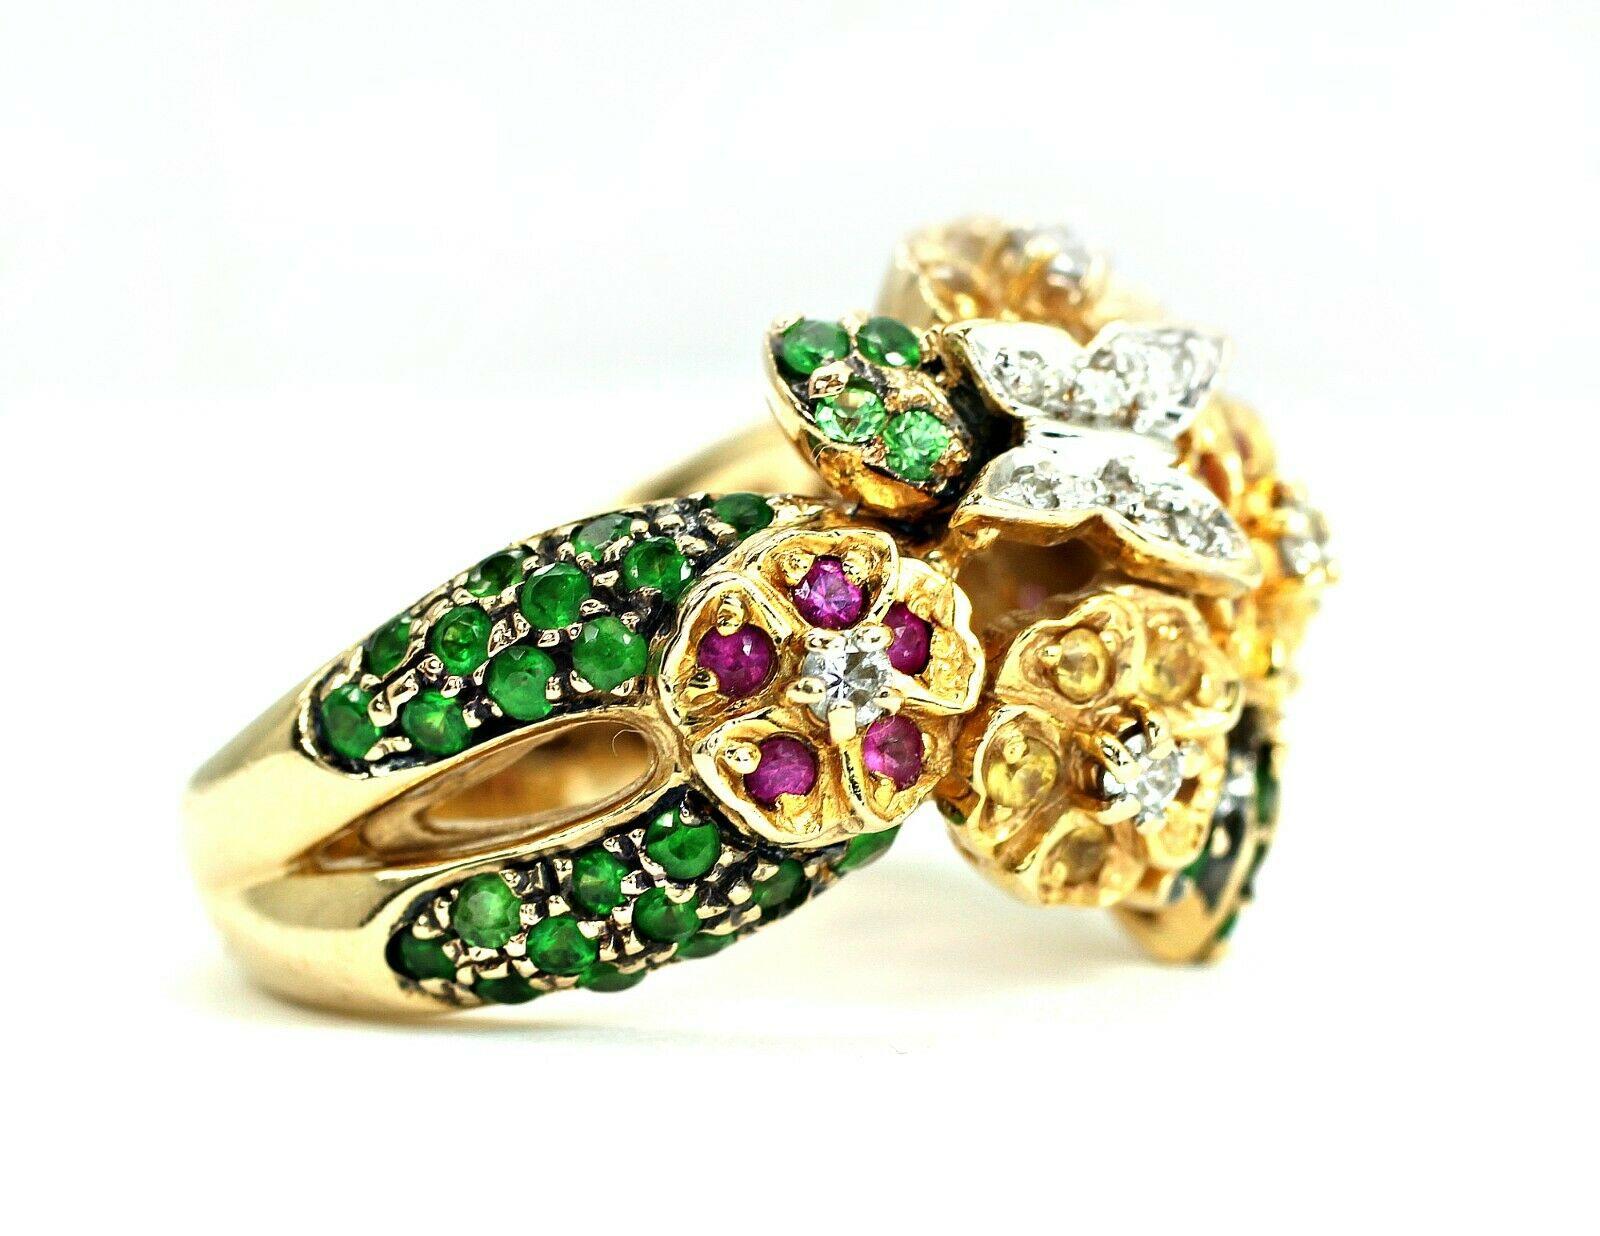 This is a 14k yellow gold cocktail ring with tsavorite, pink and yellow sapphire gemstones, and round diamonds. The tsavorite are 60 pieces, approximately 1.20 carat total weight. The pink and yellow sapphire are 30 pieces, approximately 0.60 carat